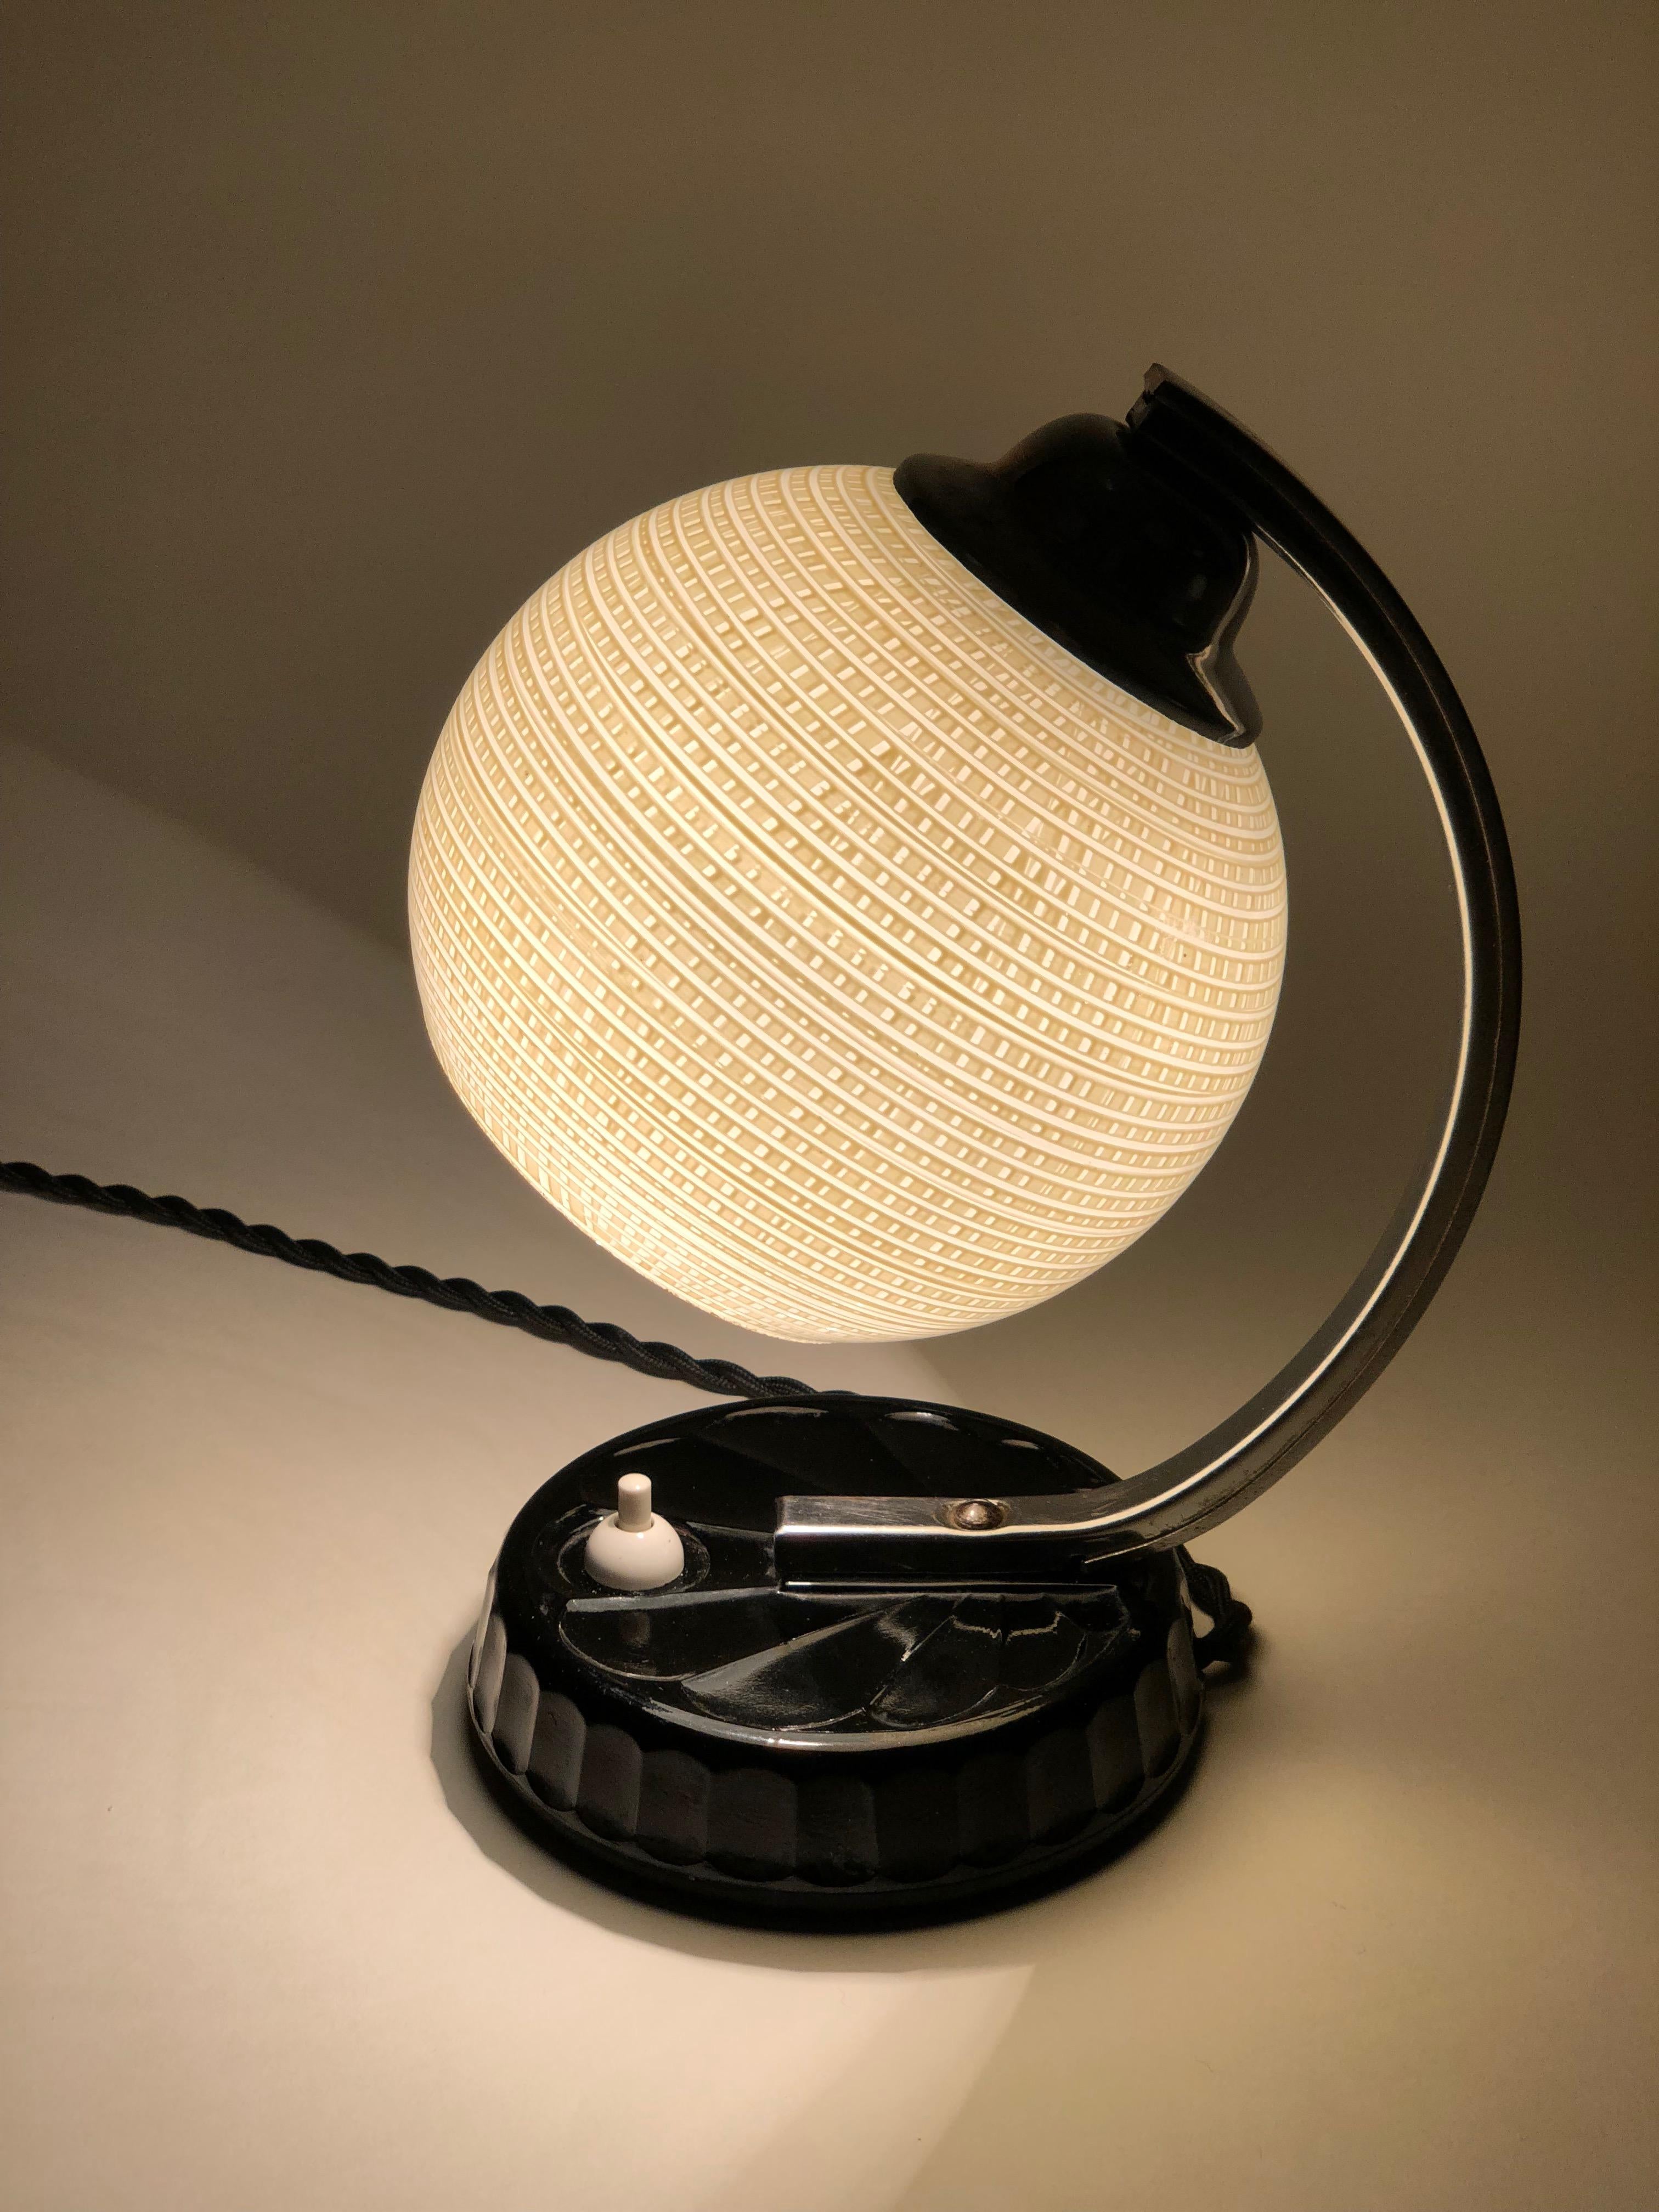 Art Deco Table Lamp from the Czech Republic, from CMS Krasno 2